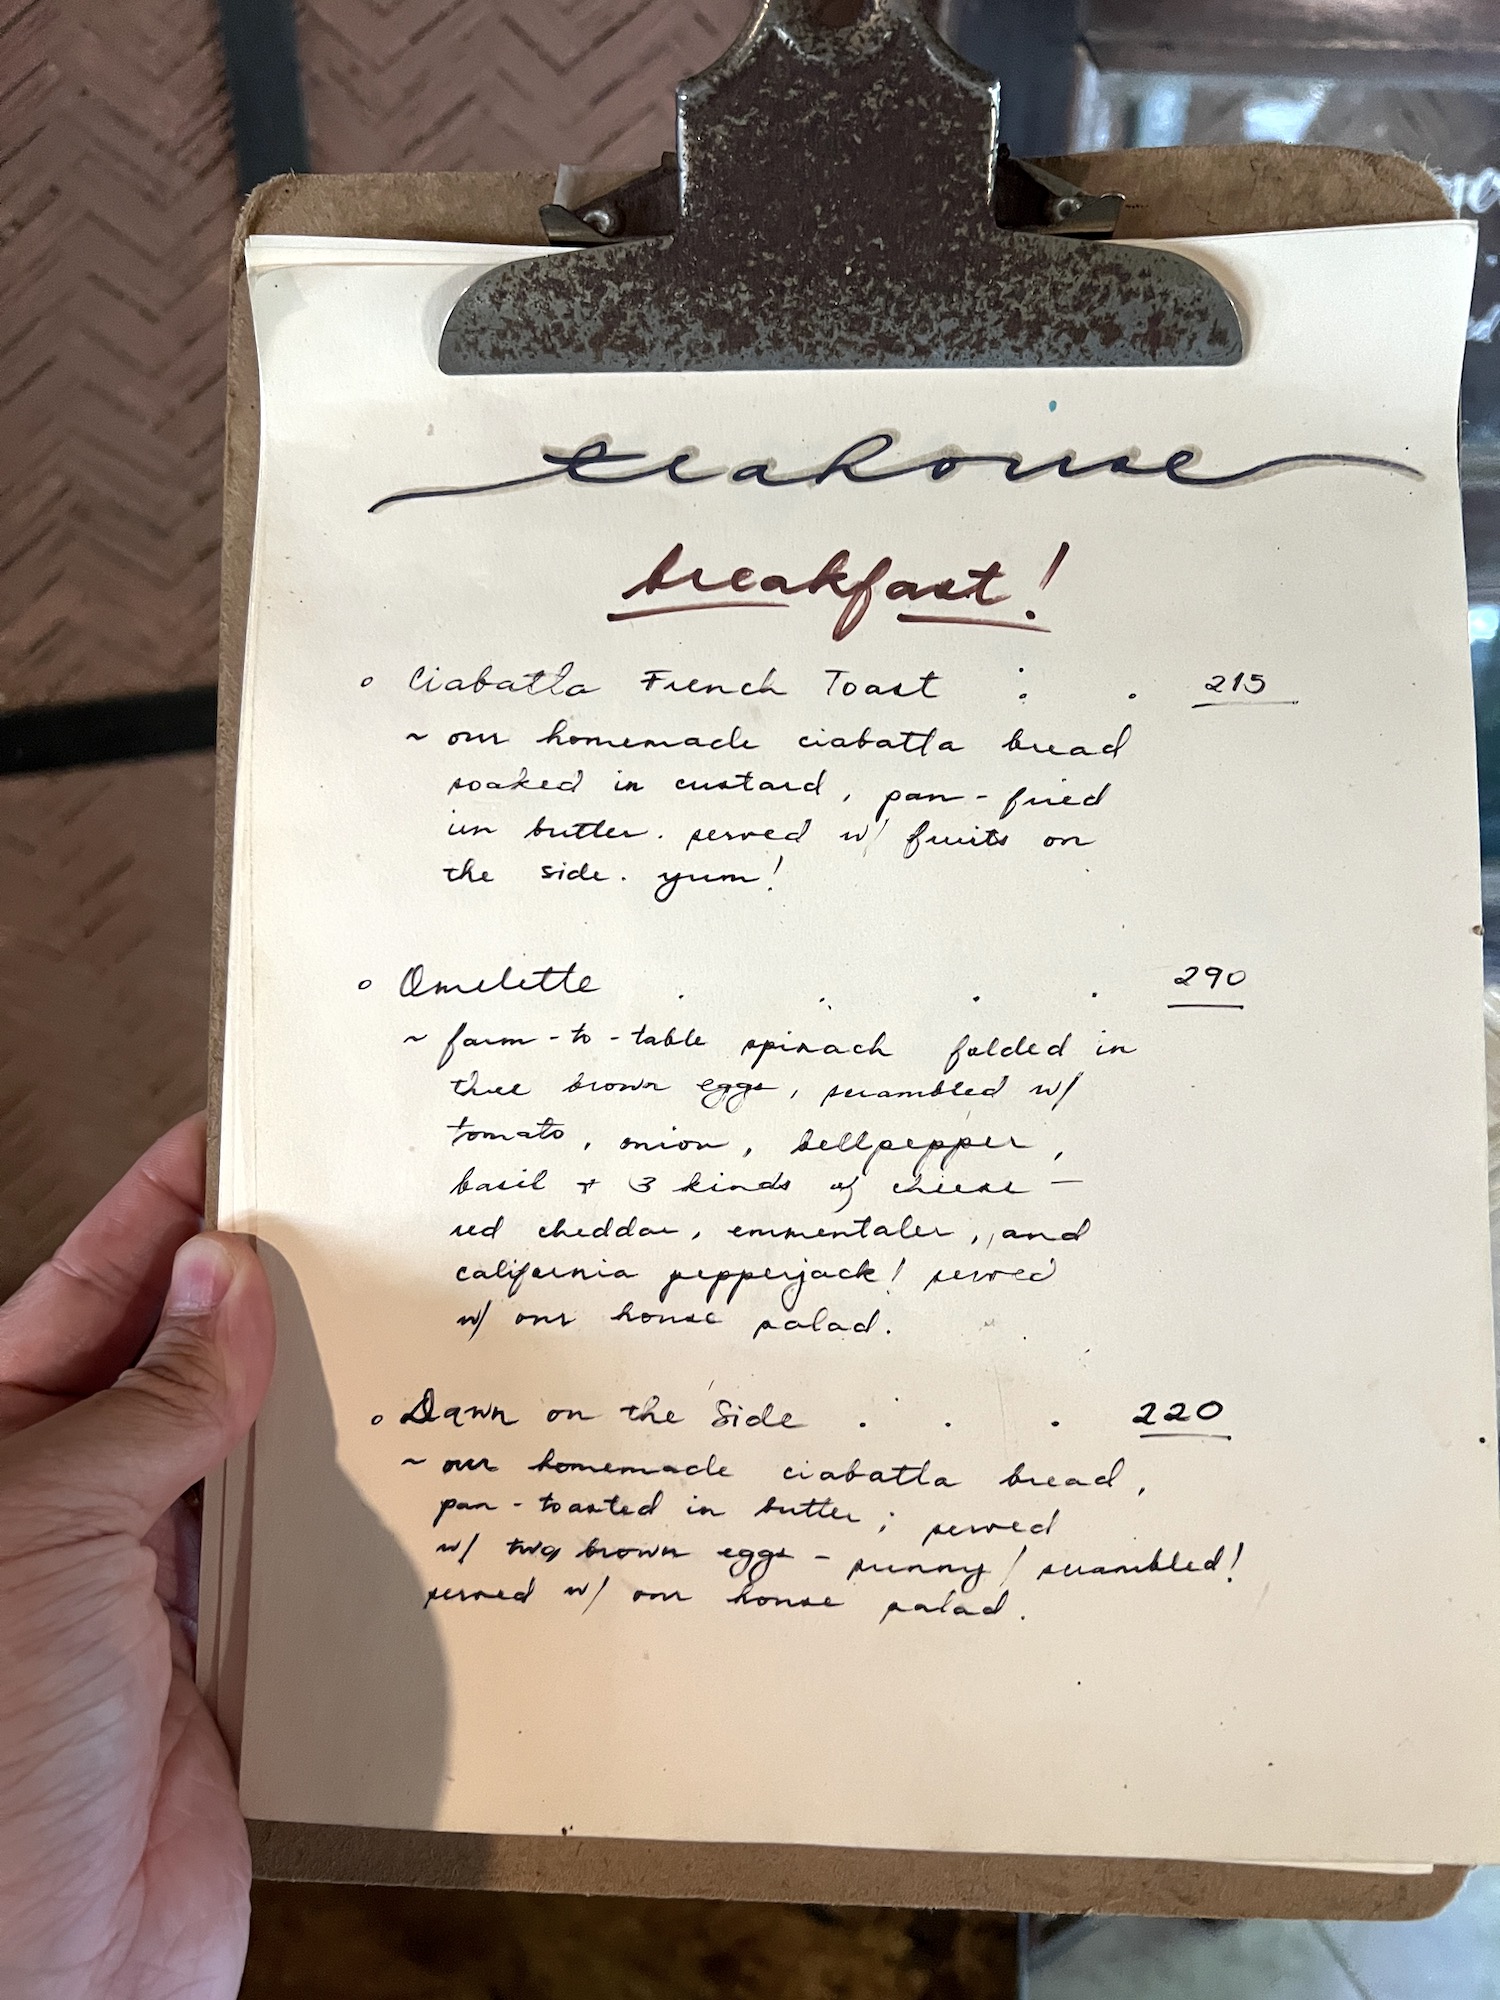 The menu features calligraphy handwritten by Coral herself